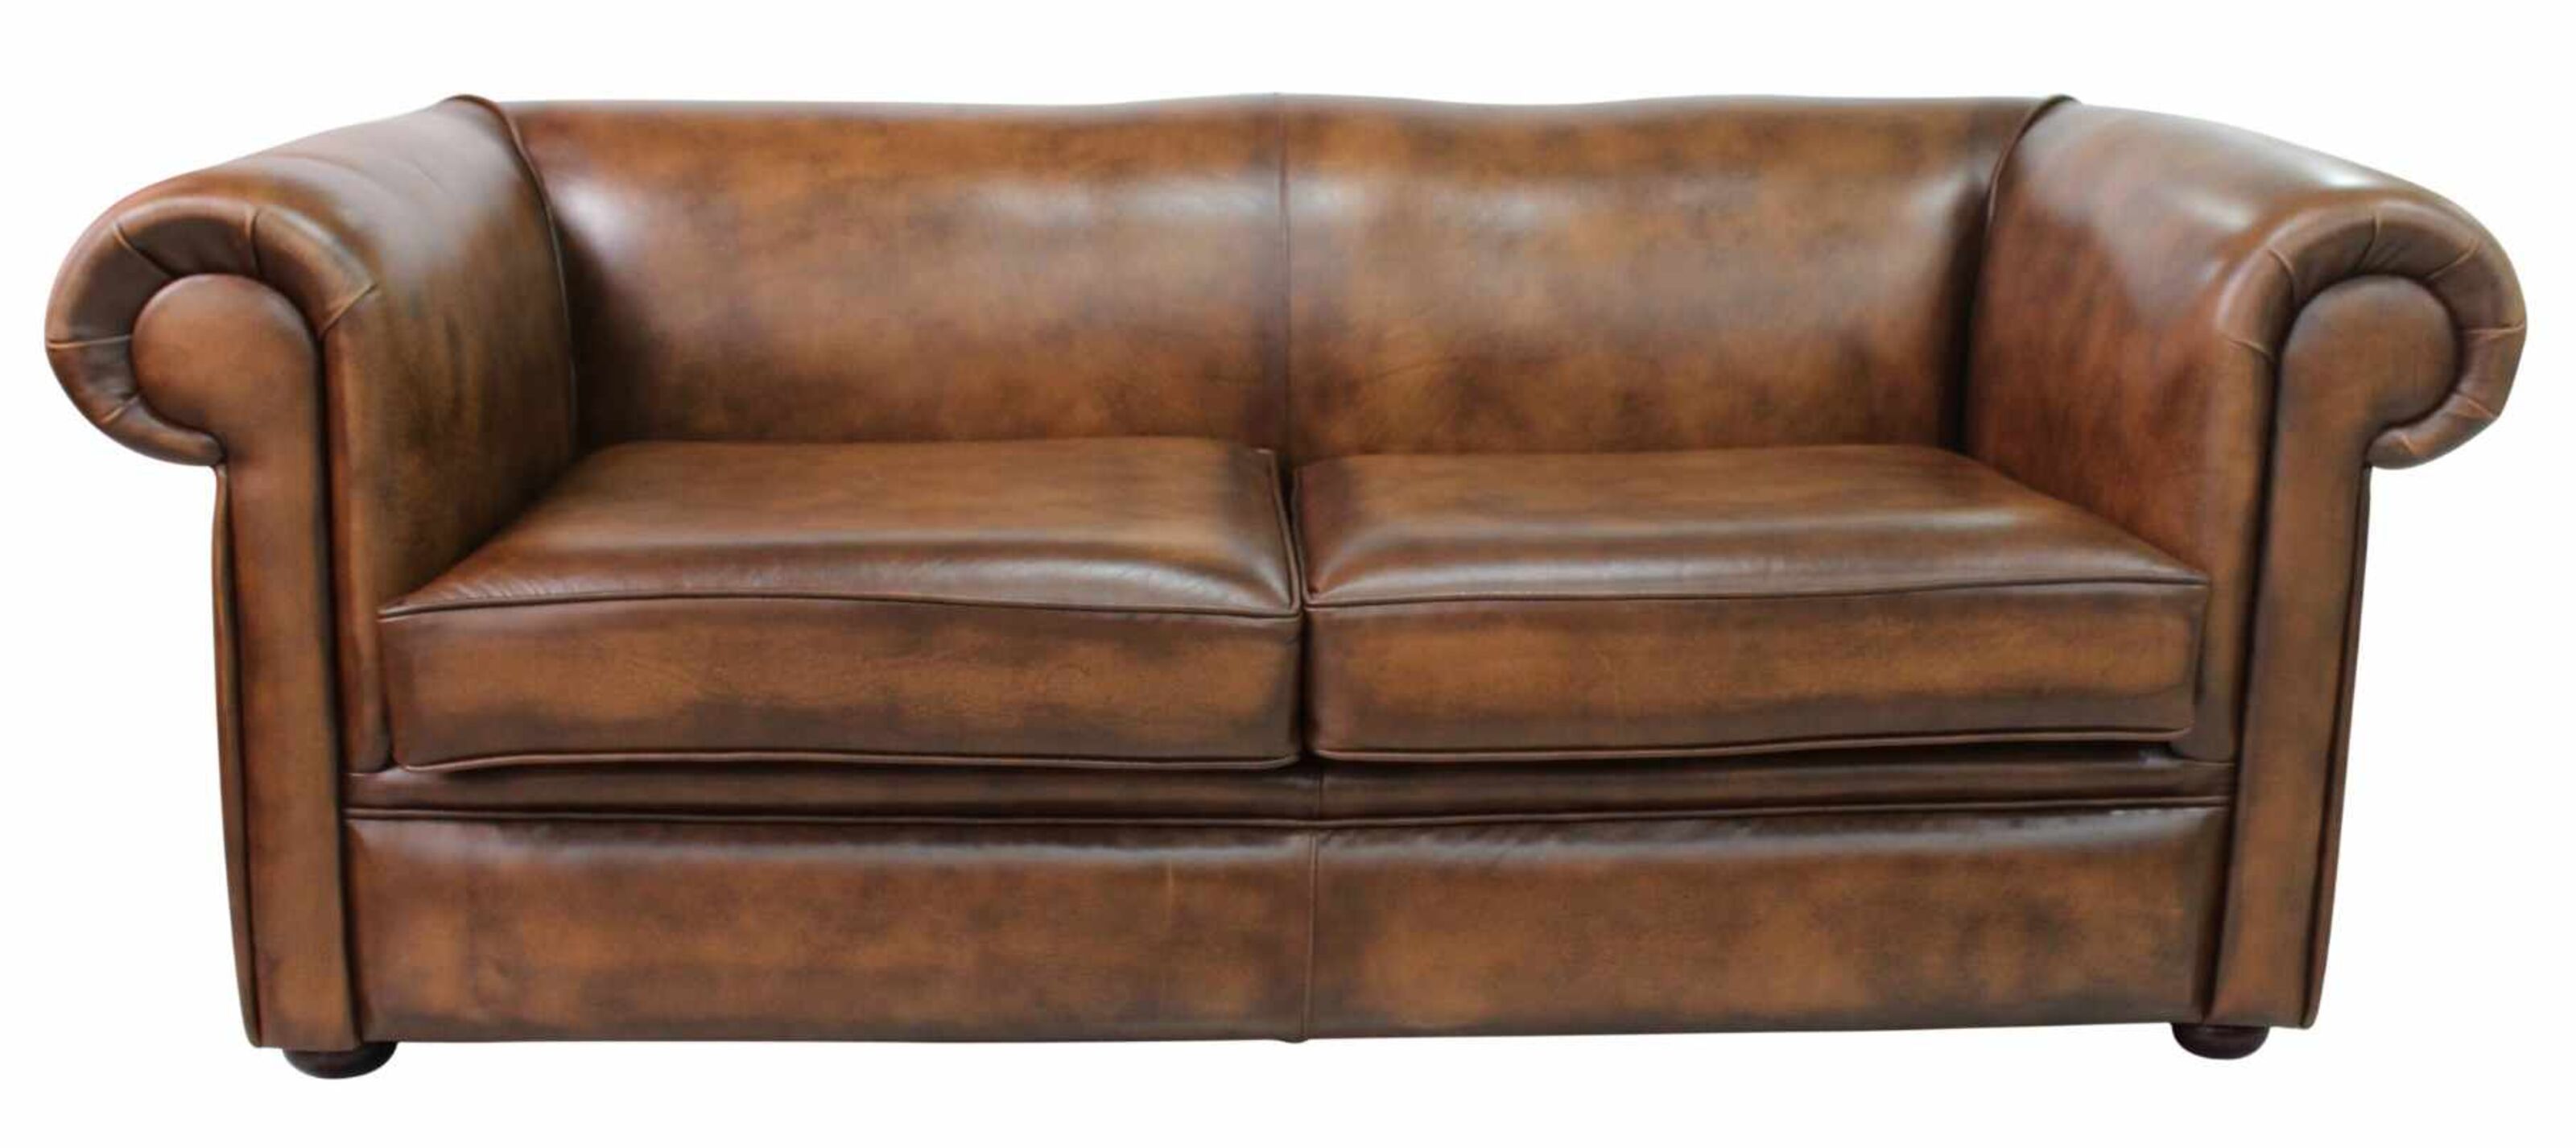 Cushioned Comfort: Exploring Chesterfield Sofas with Cushions  %Post Title